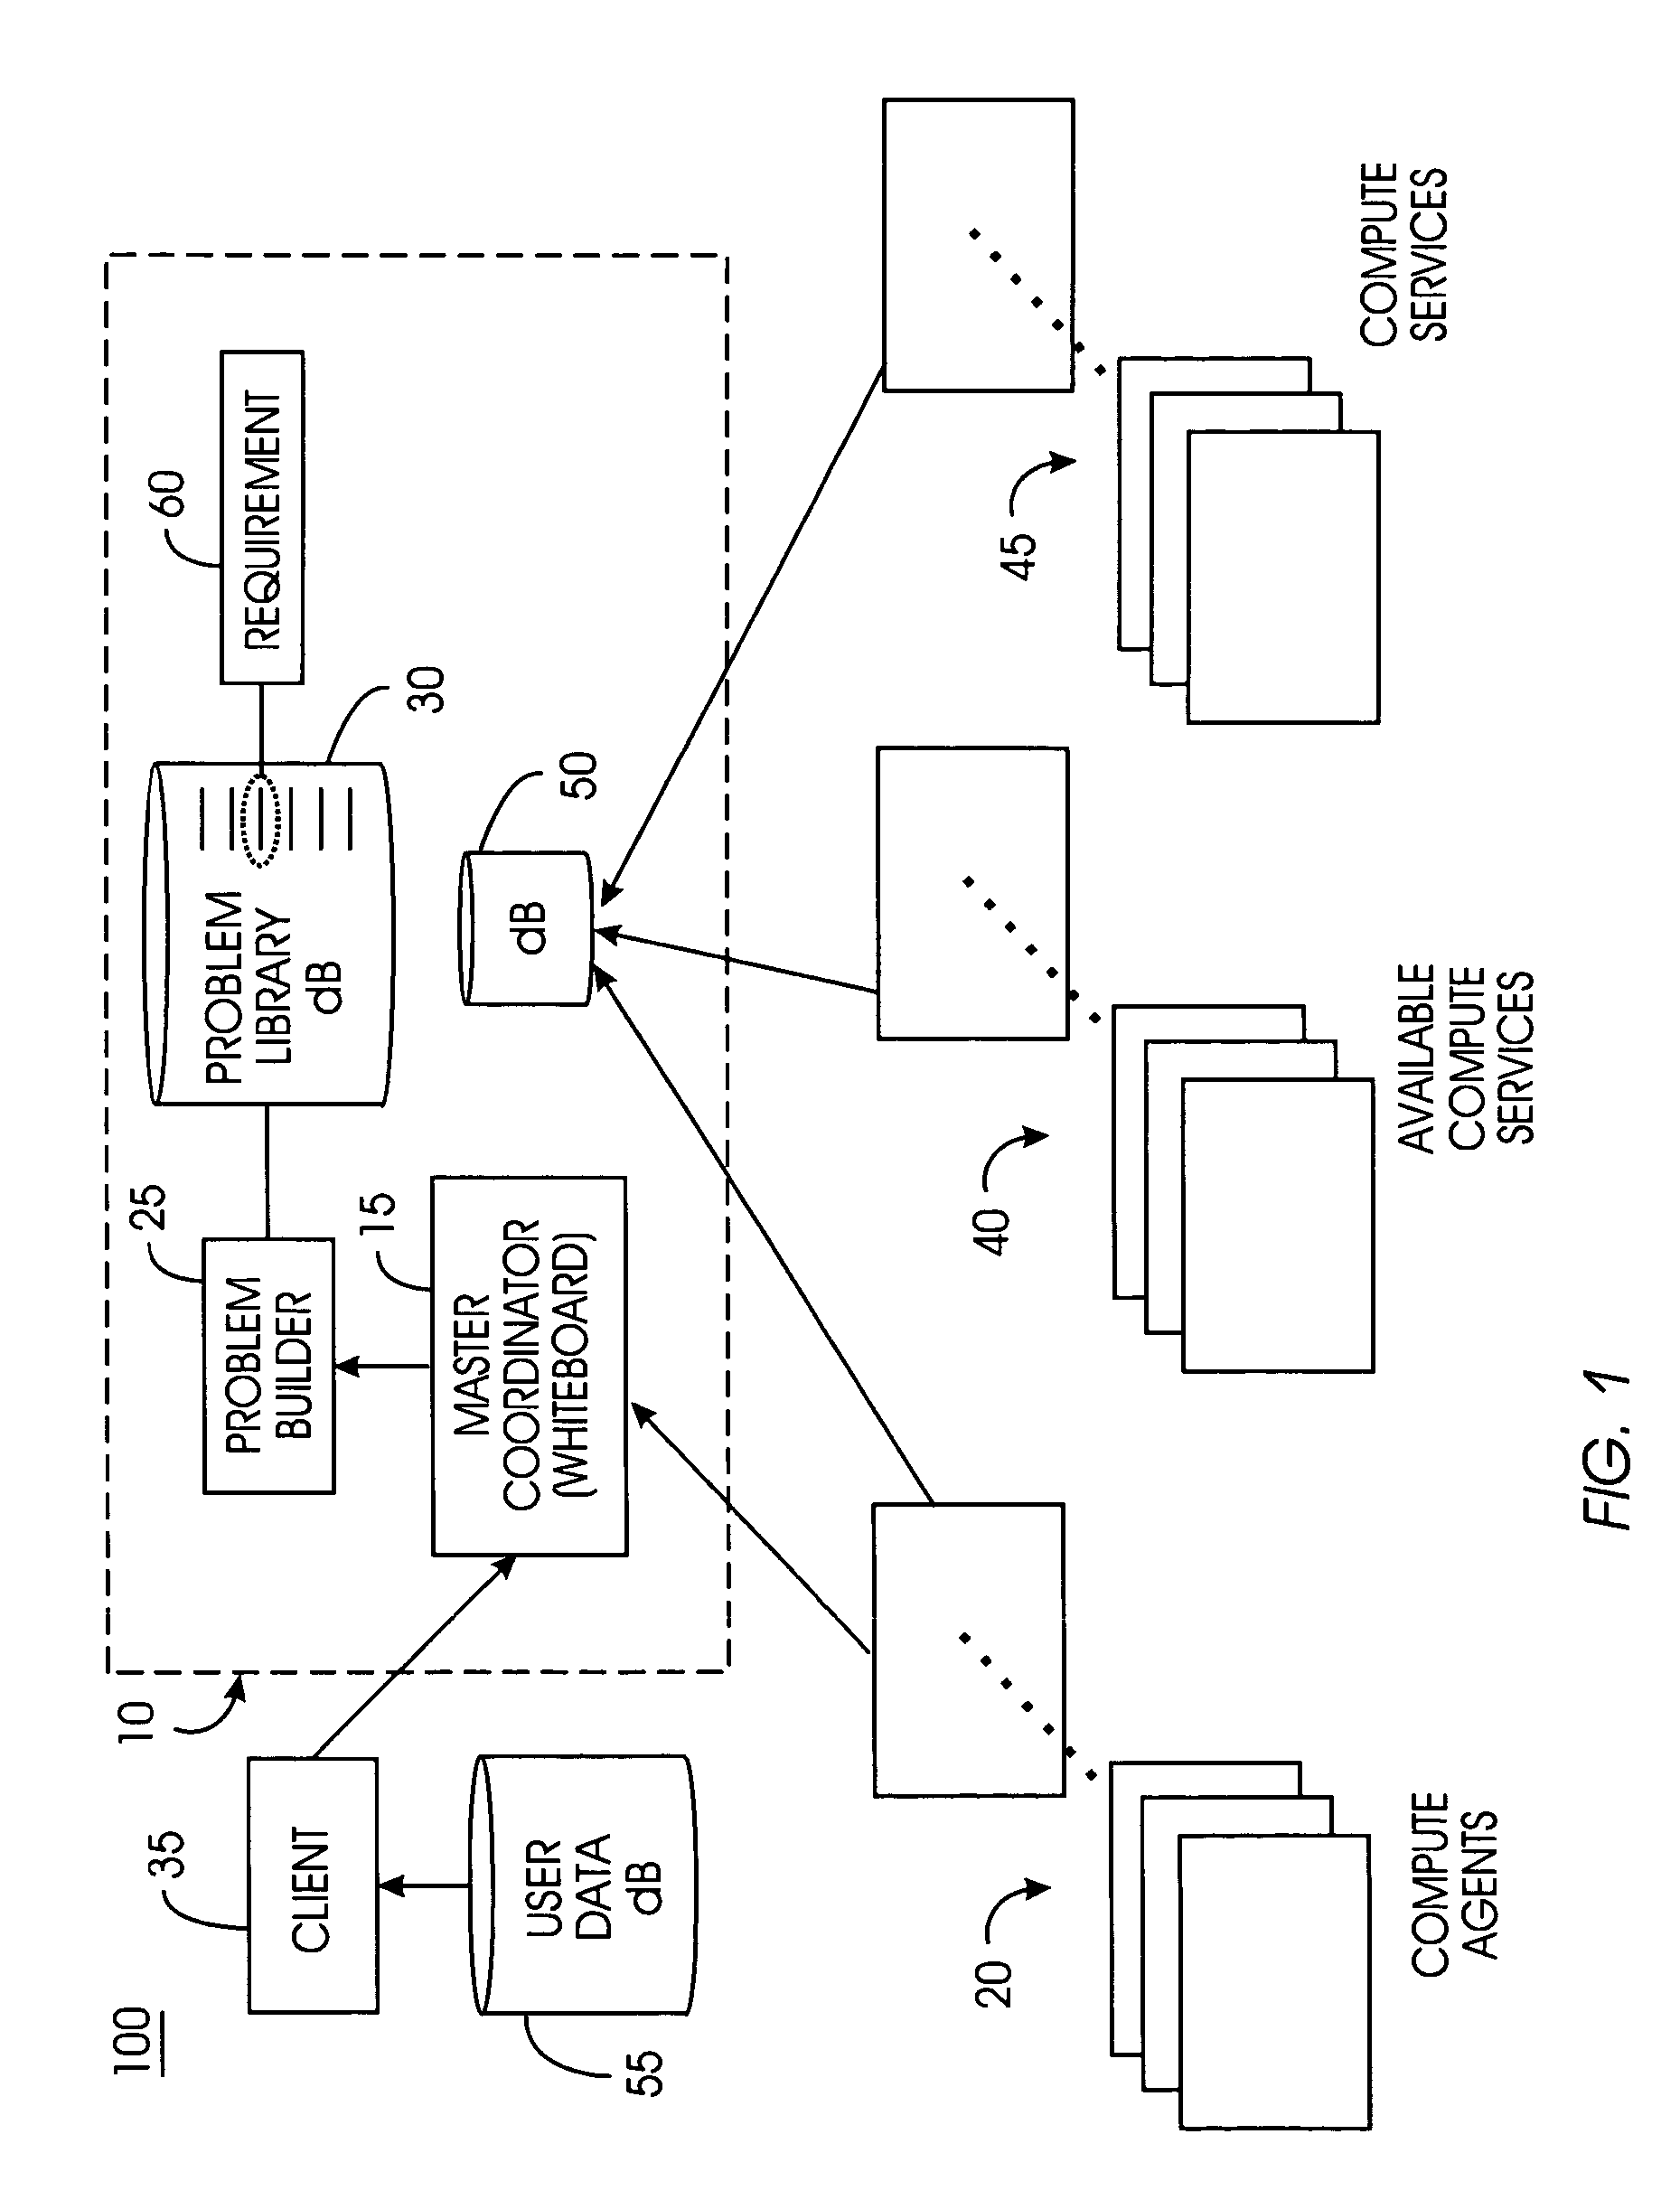 System and method for automatically segmenting and populating a distributed computing problem